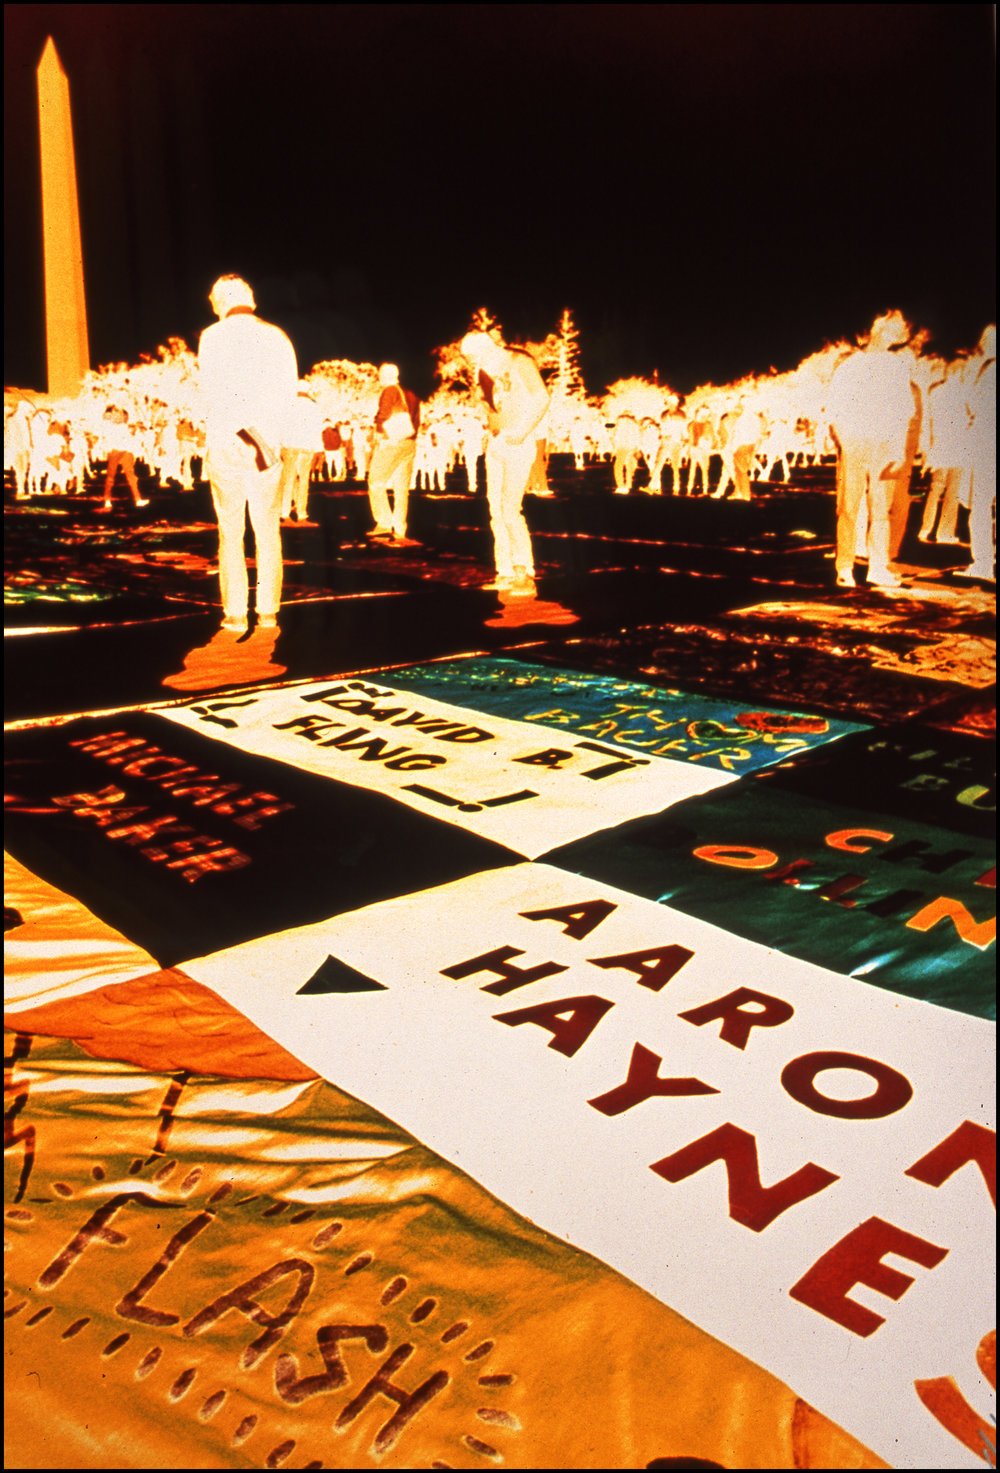 “AIDS Quilt” from the “AIDS Art (1987-1997)” series (Copy)